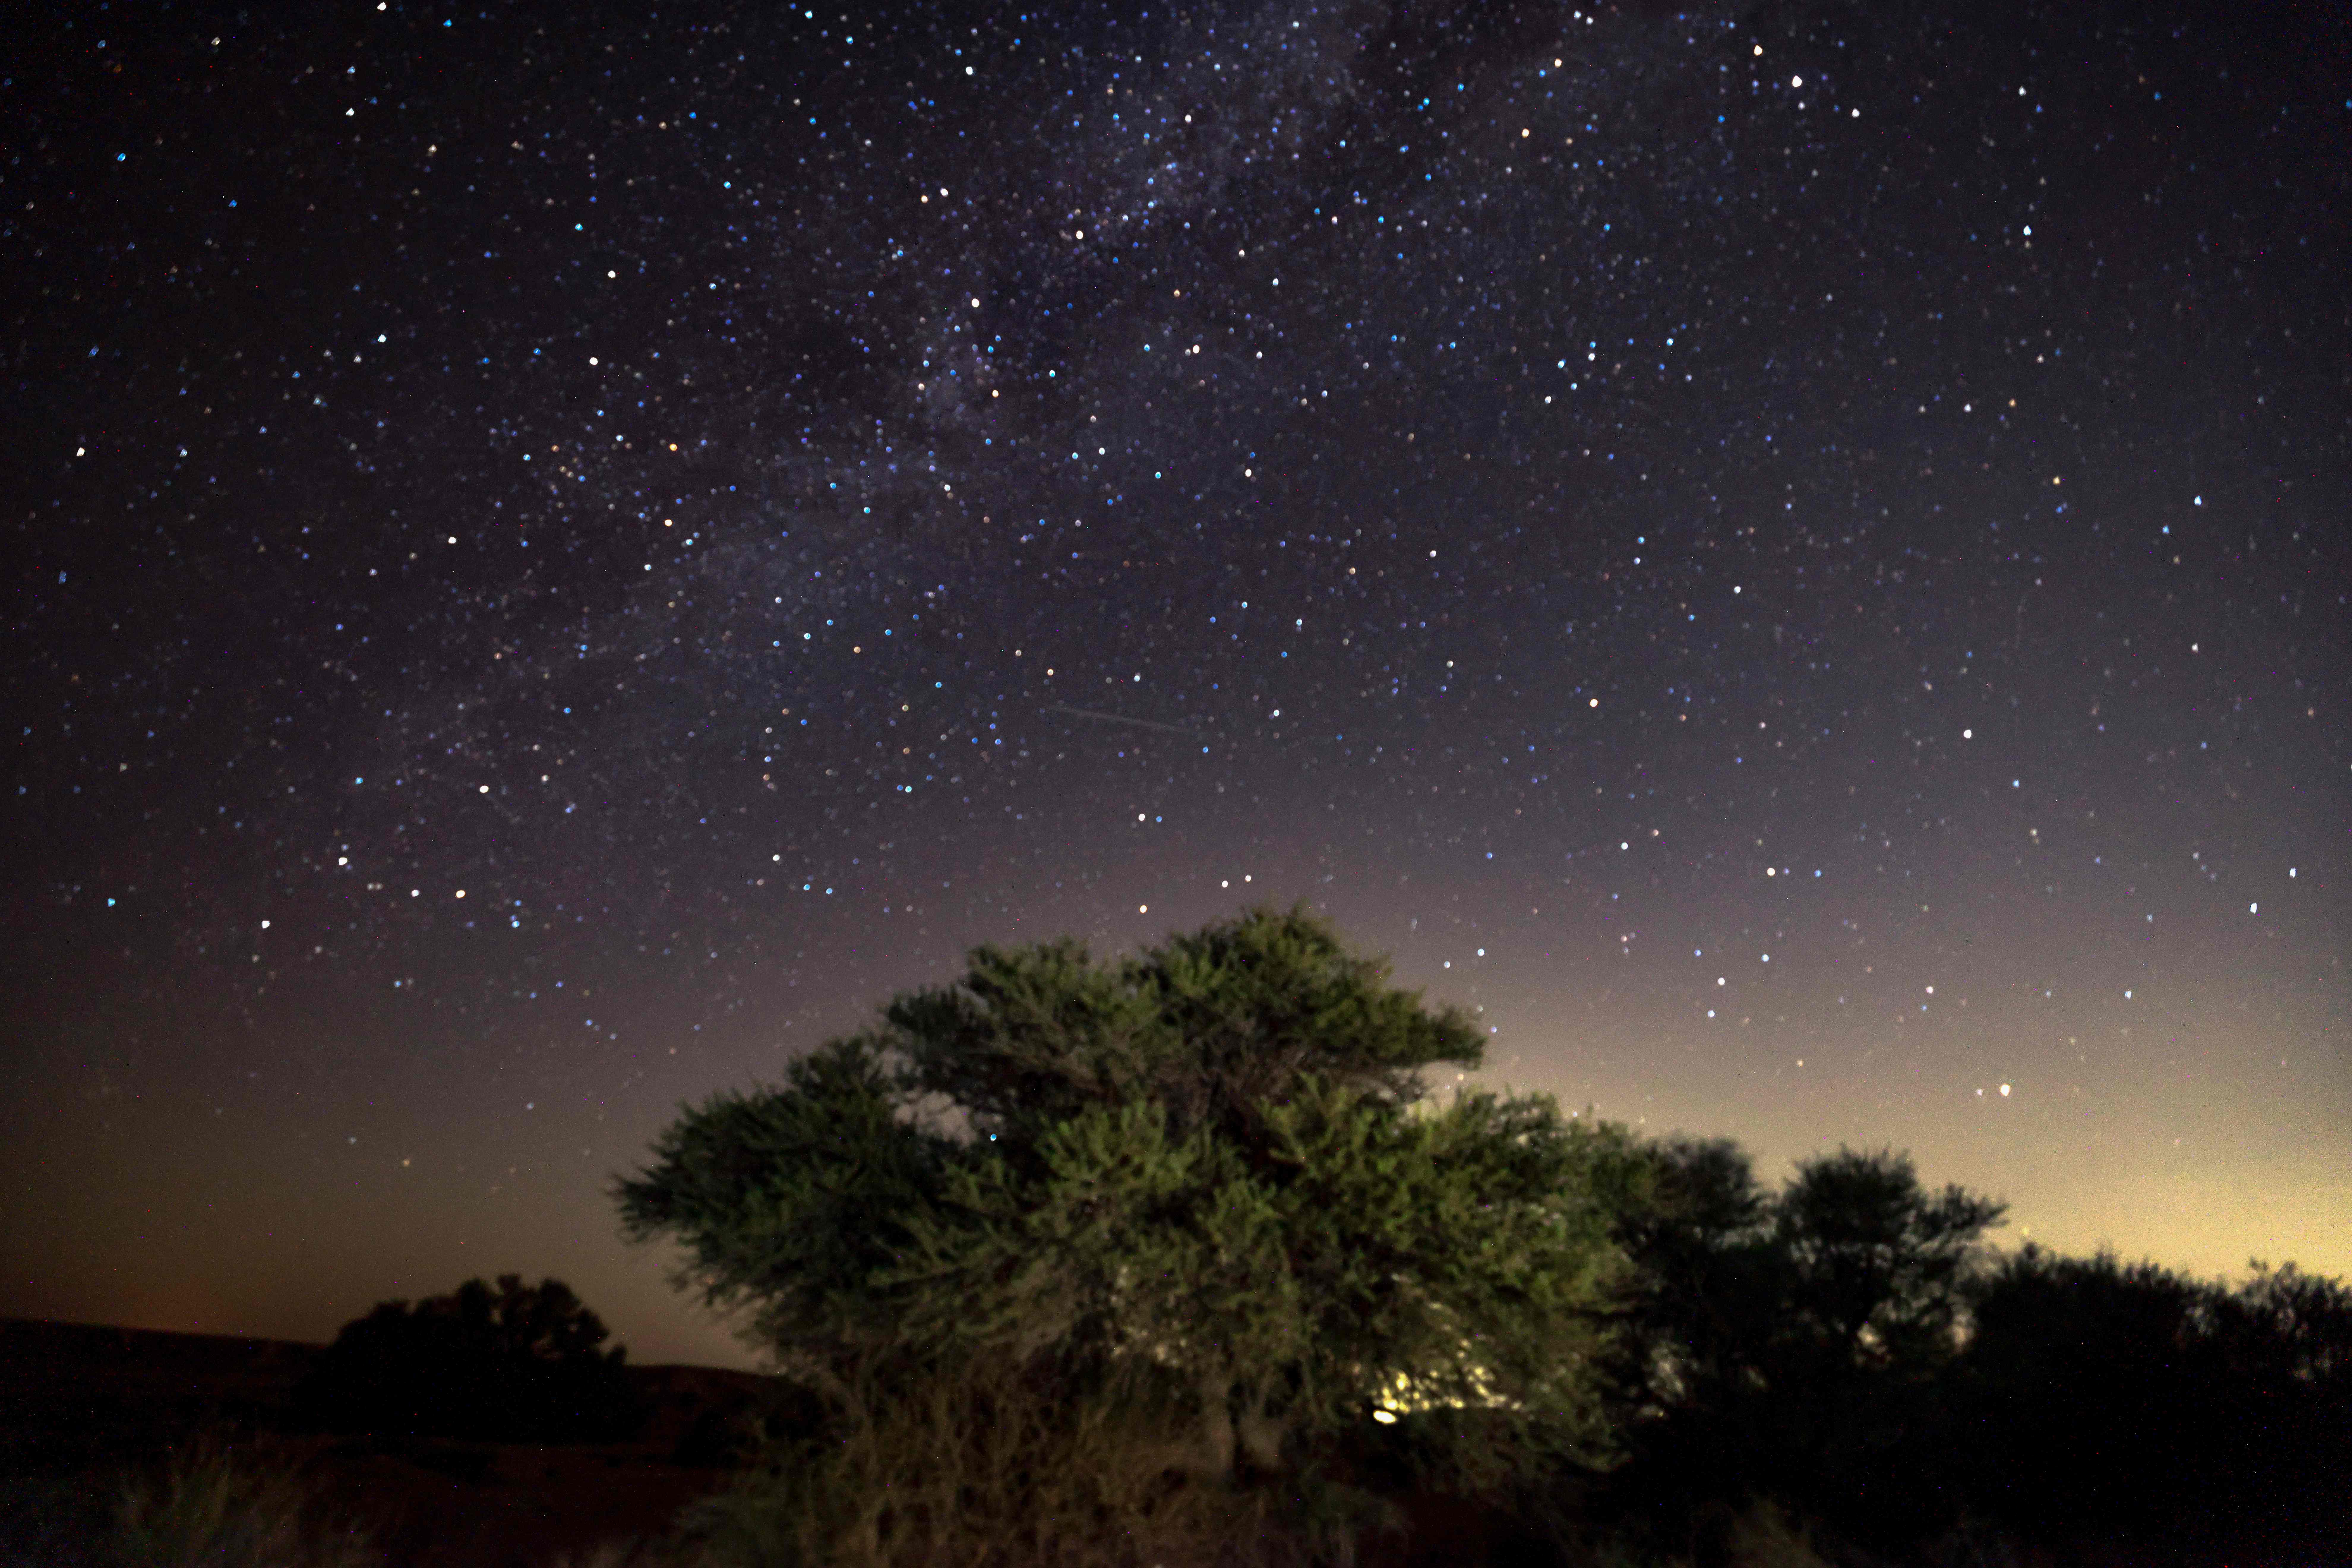 The Milky Way galaxy appears as a Perseid meteor streaks across the sky above a camping site in the southern israel Negev desert near the Israeli village of Faran early on 12 August 2023